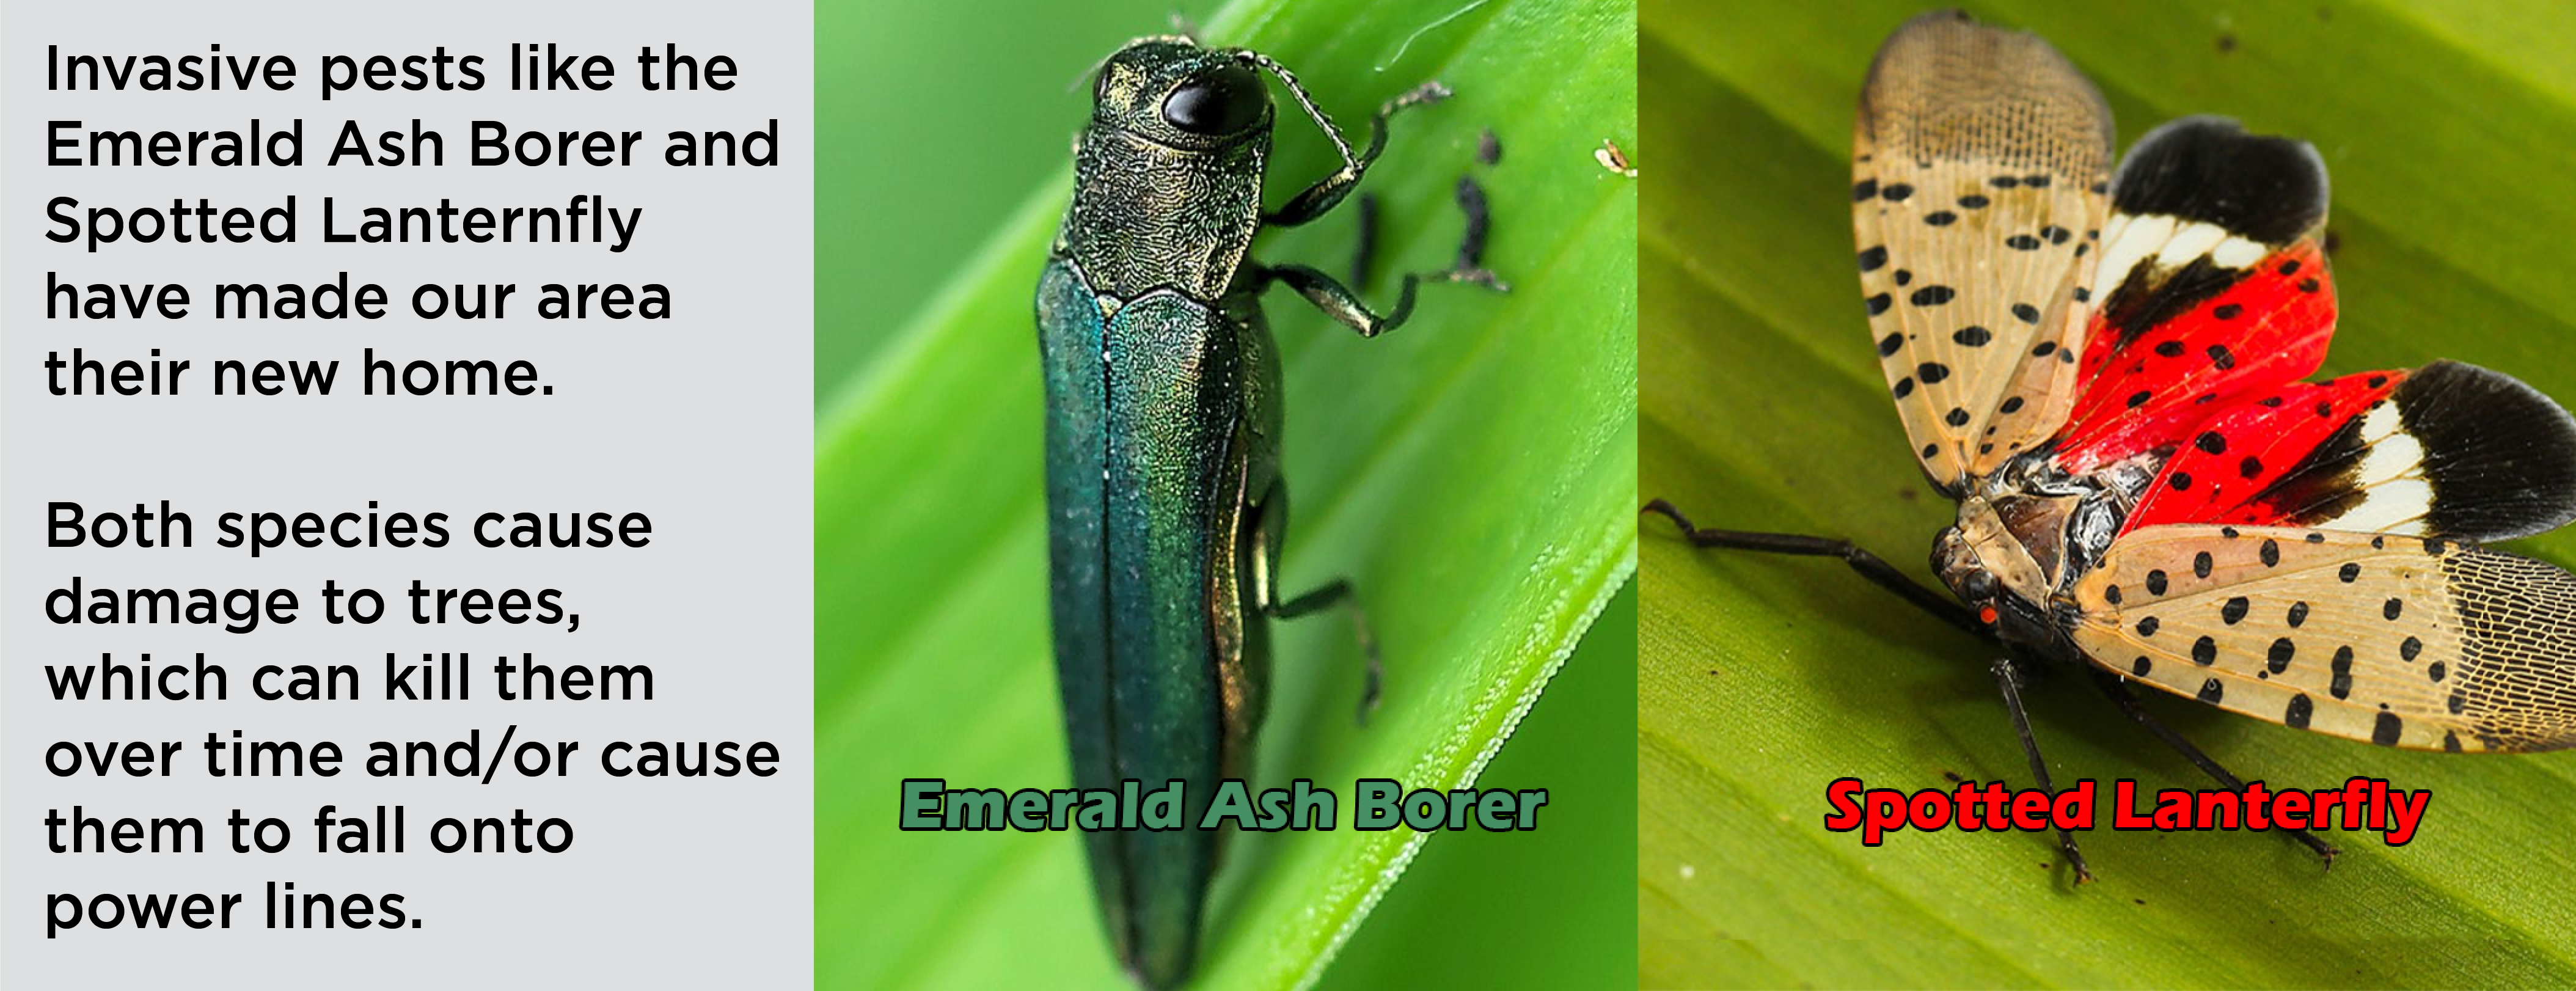 The Emerald Ash Borer and Spotted Lanternfly - Invasive pests like the Emerald Ash Borer and Spotted Lanternfly have made our area their new home.  Both species cause damage to trees, which can kill them over time and/or cause them to fall onto power lines.